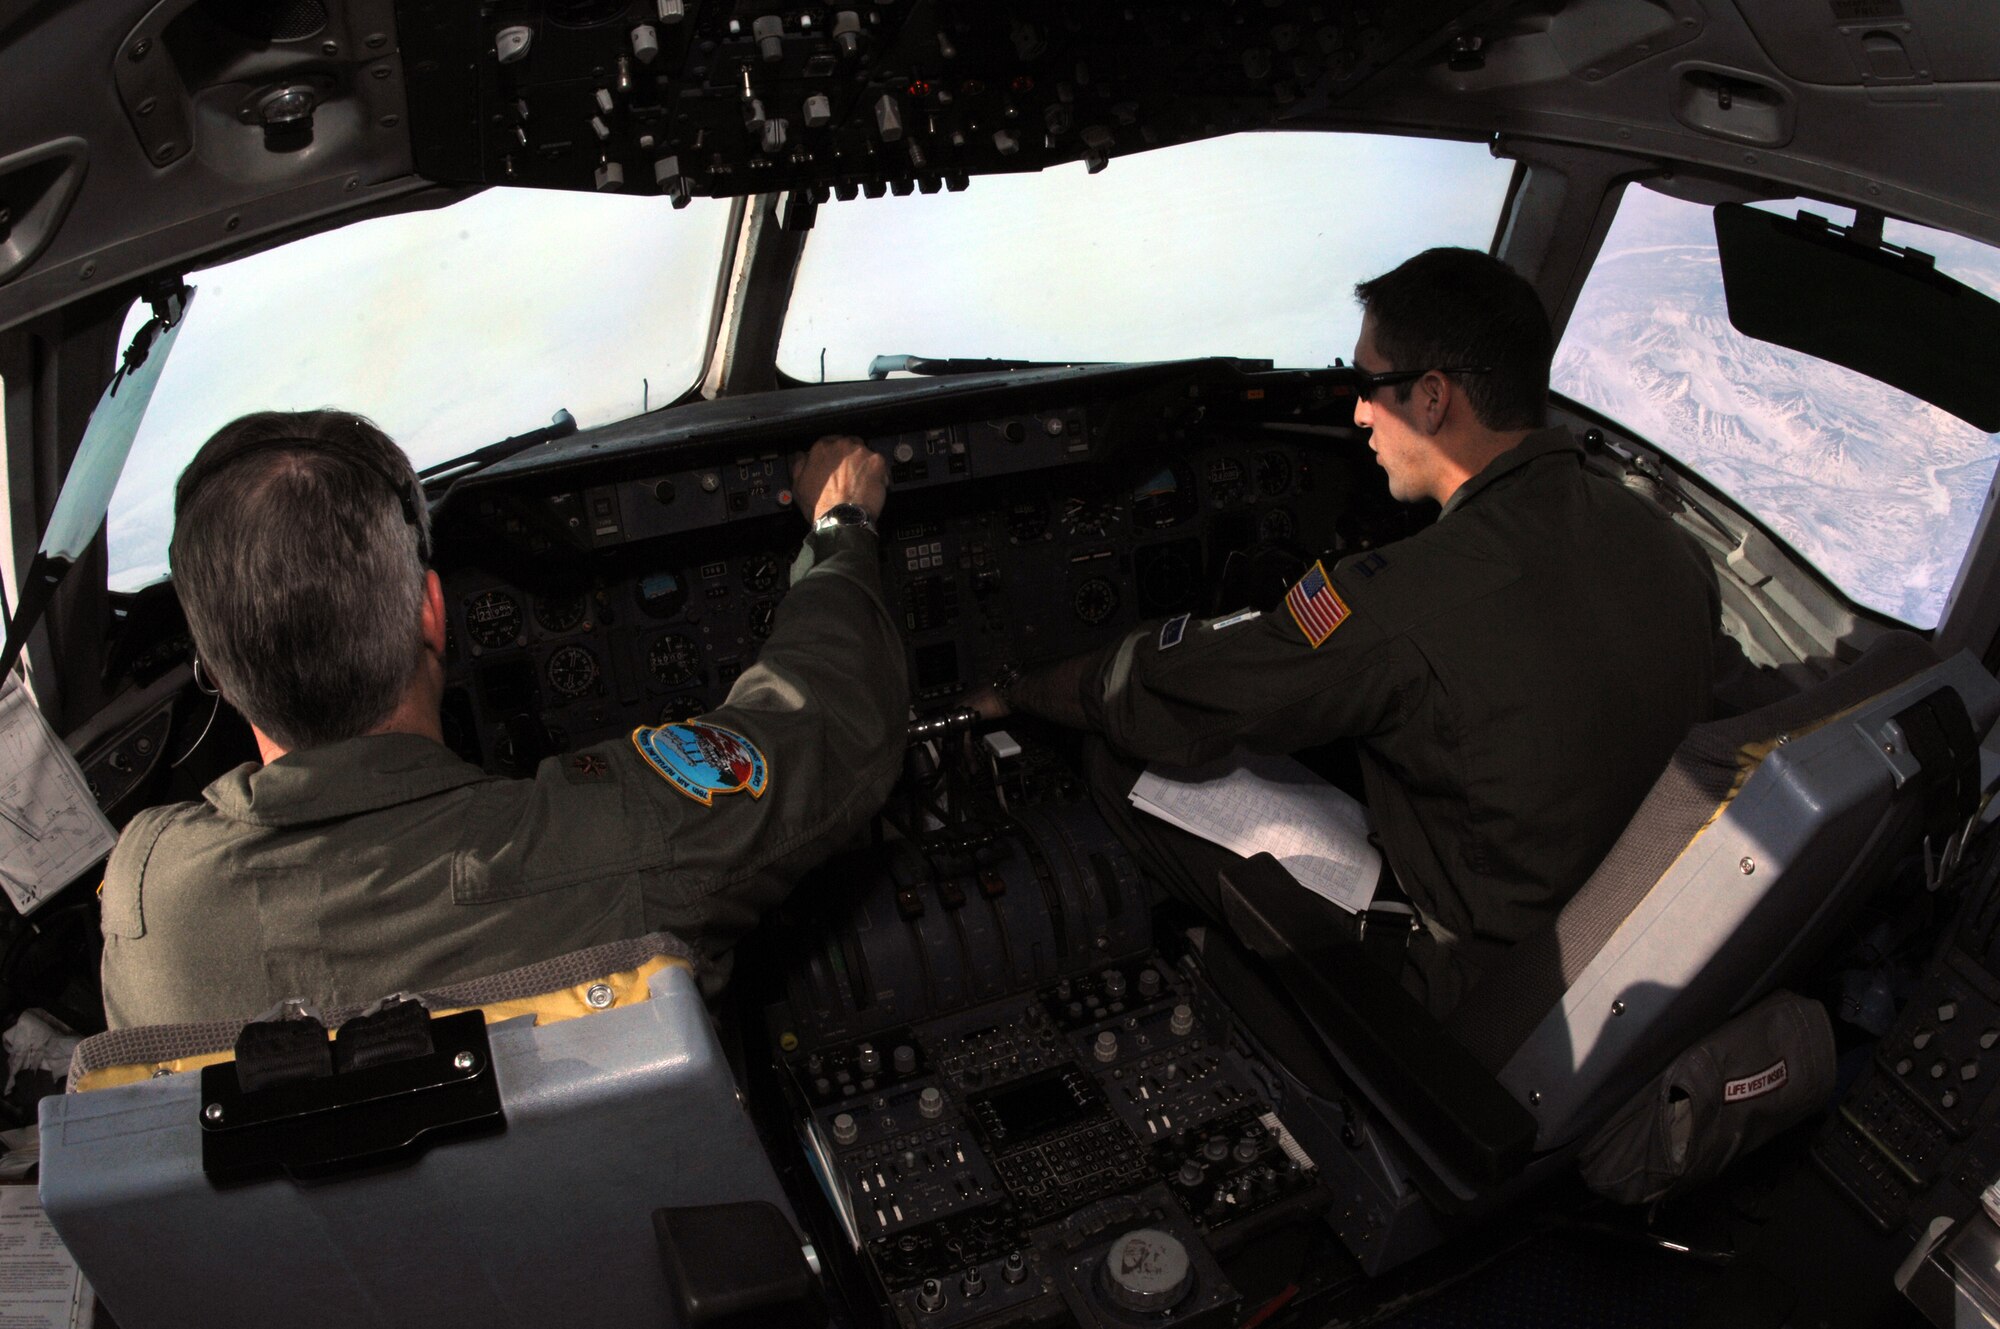 EIELSON AIR FORCE BASE, Alaska -- Major Argyle (left), KC-10 Aircraft Commander, and Captain Capodicasa, KC-10 pilot, 78th Air Refueling Squadron, McGuire Air Force Base, New Jersey fly over the Pacific Alaska Range Complex here as call sign "Shaman Five One" during a refueling mission on 18 April in support of Red Flag-Alaska 07-1. Red Flag-Alaska is a Pacific Air Forces-directed field training exercise for U.S. forces flown under simulated air combat conditions. (U.S. Air Force photo by Staff Sgt. Joshua Strang)